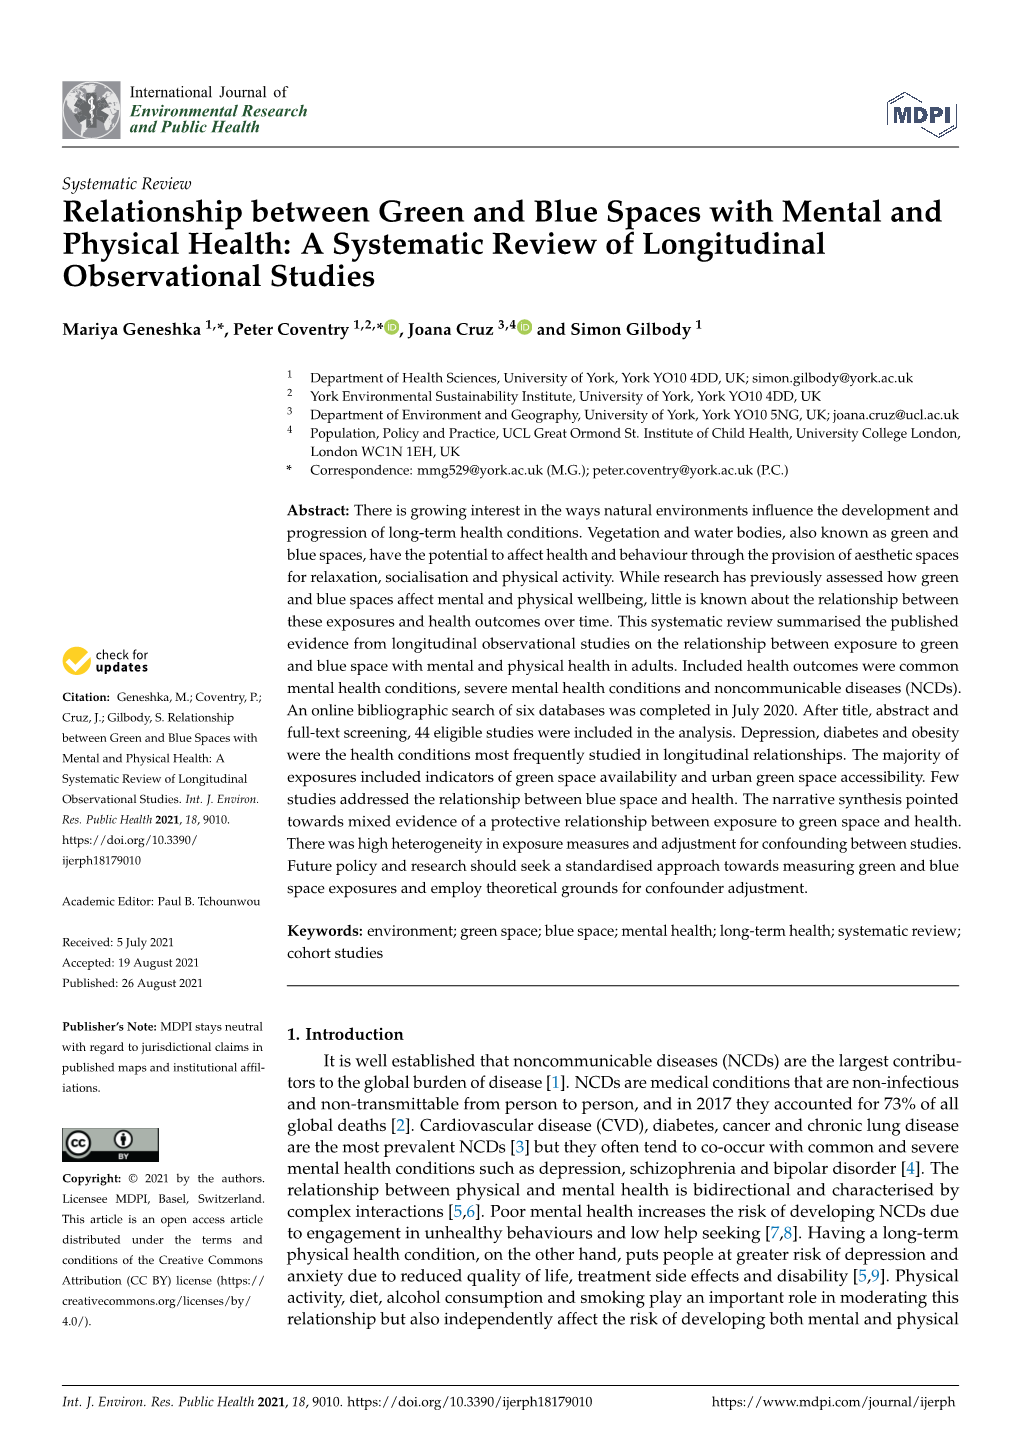 A Systematic Review of Longitudinal Observational Studies